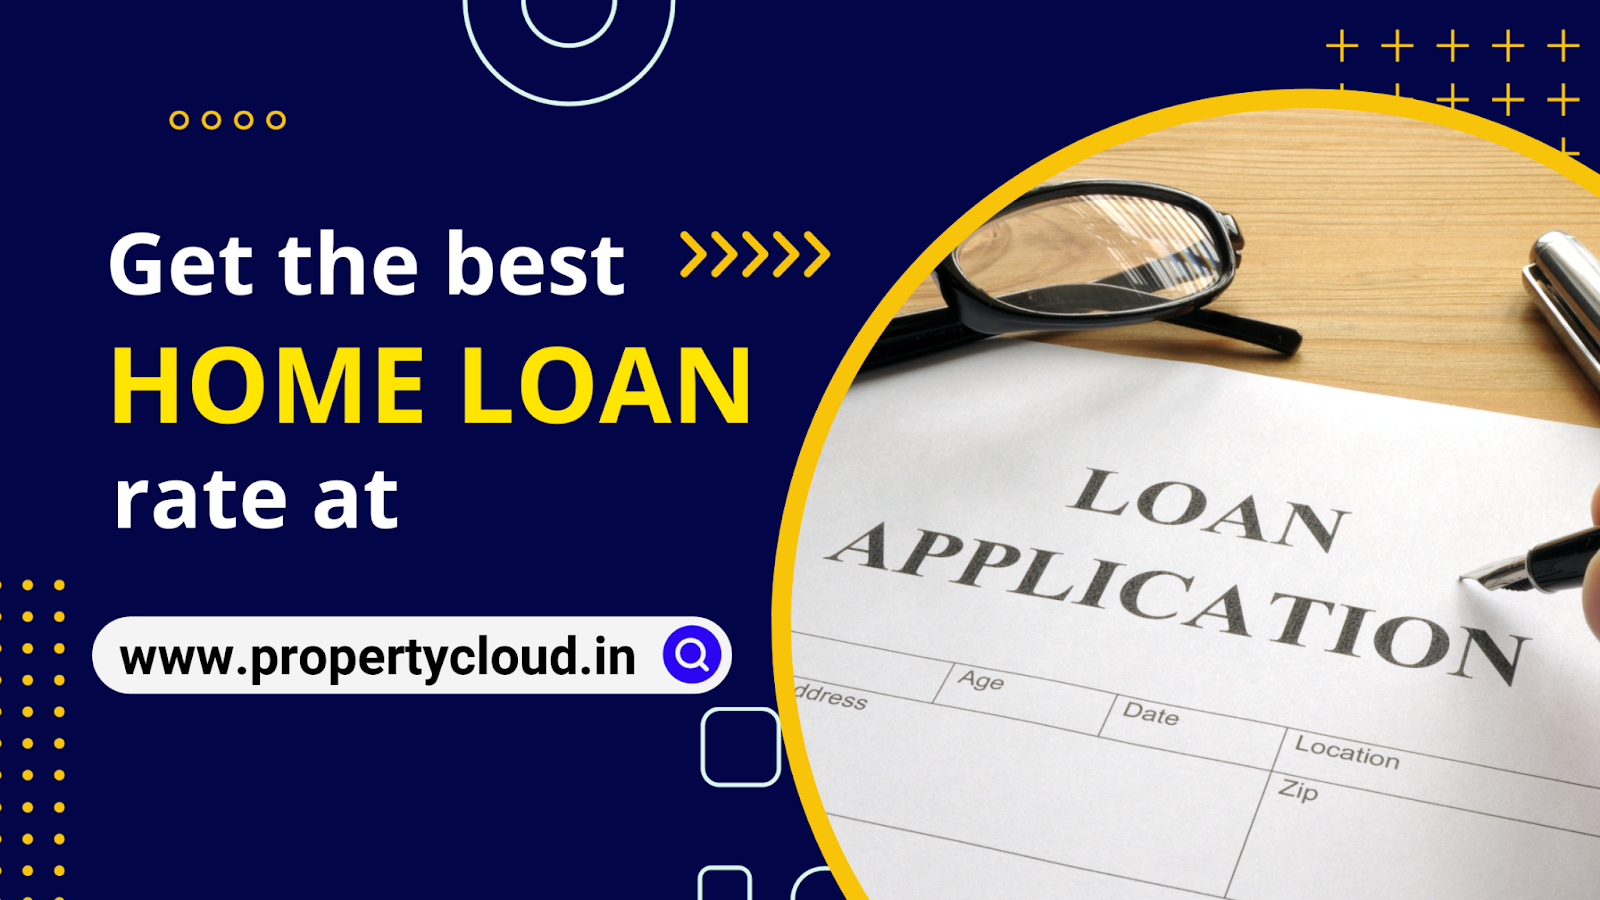 Get the best home loan rate at PropertyCloud